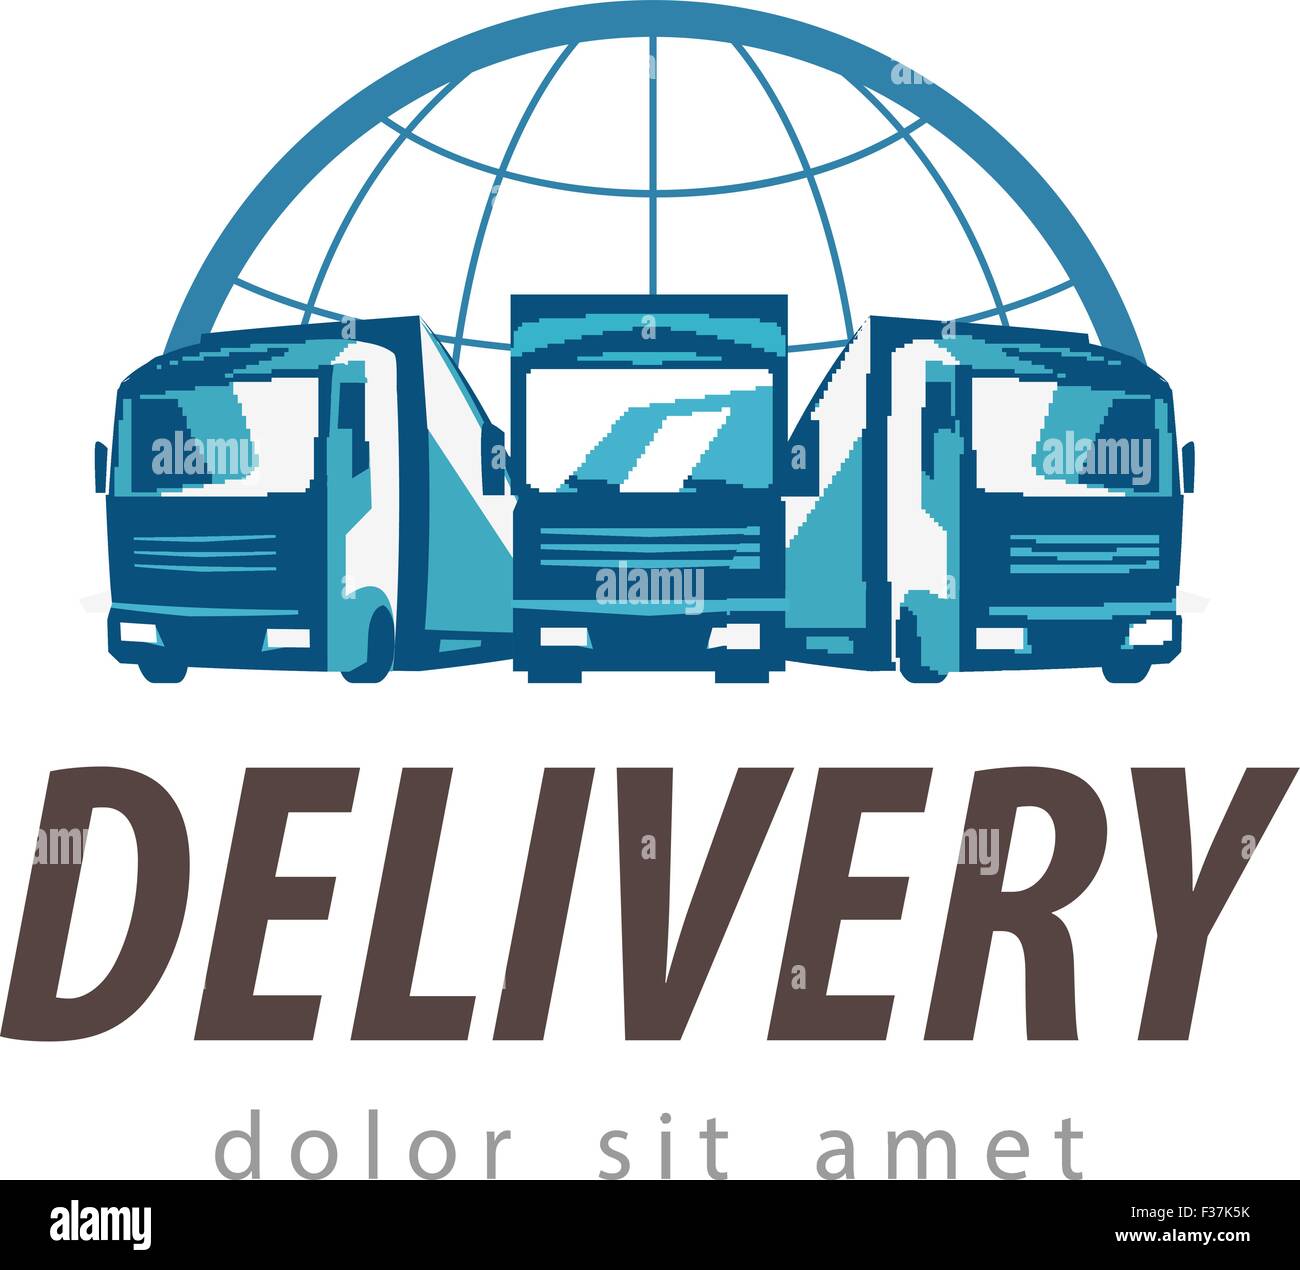 delivery vector logo design template. truck or transport icon Stock ...